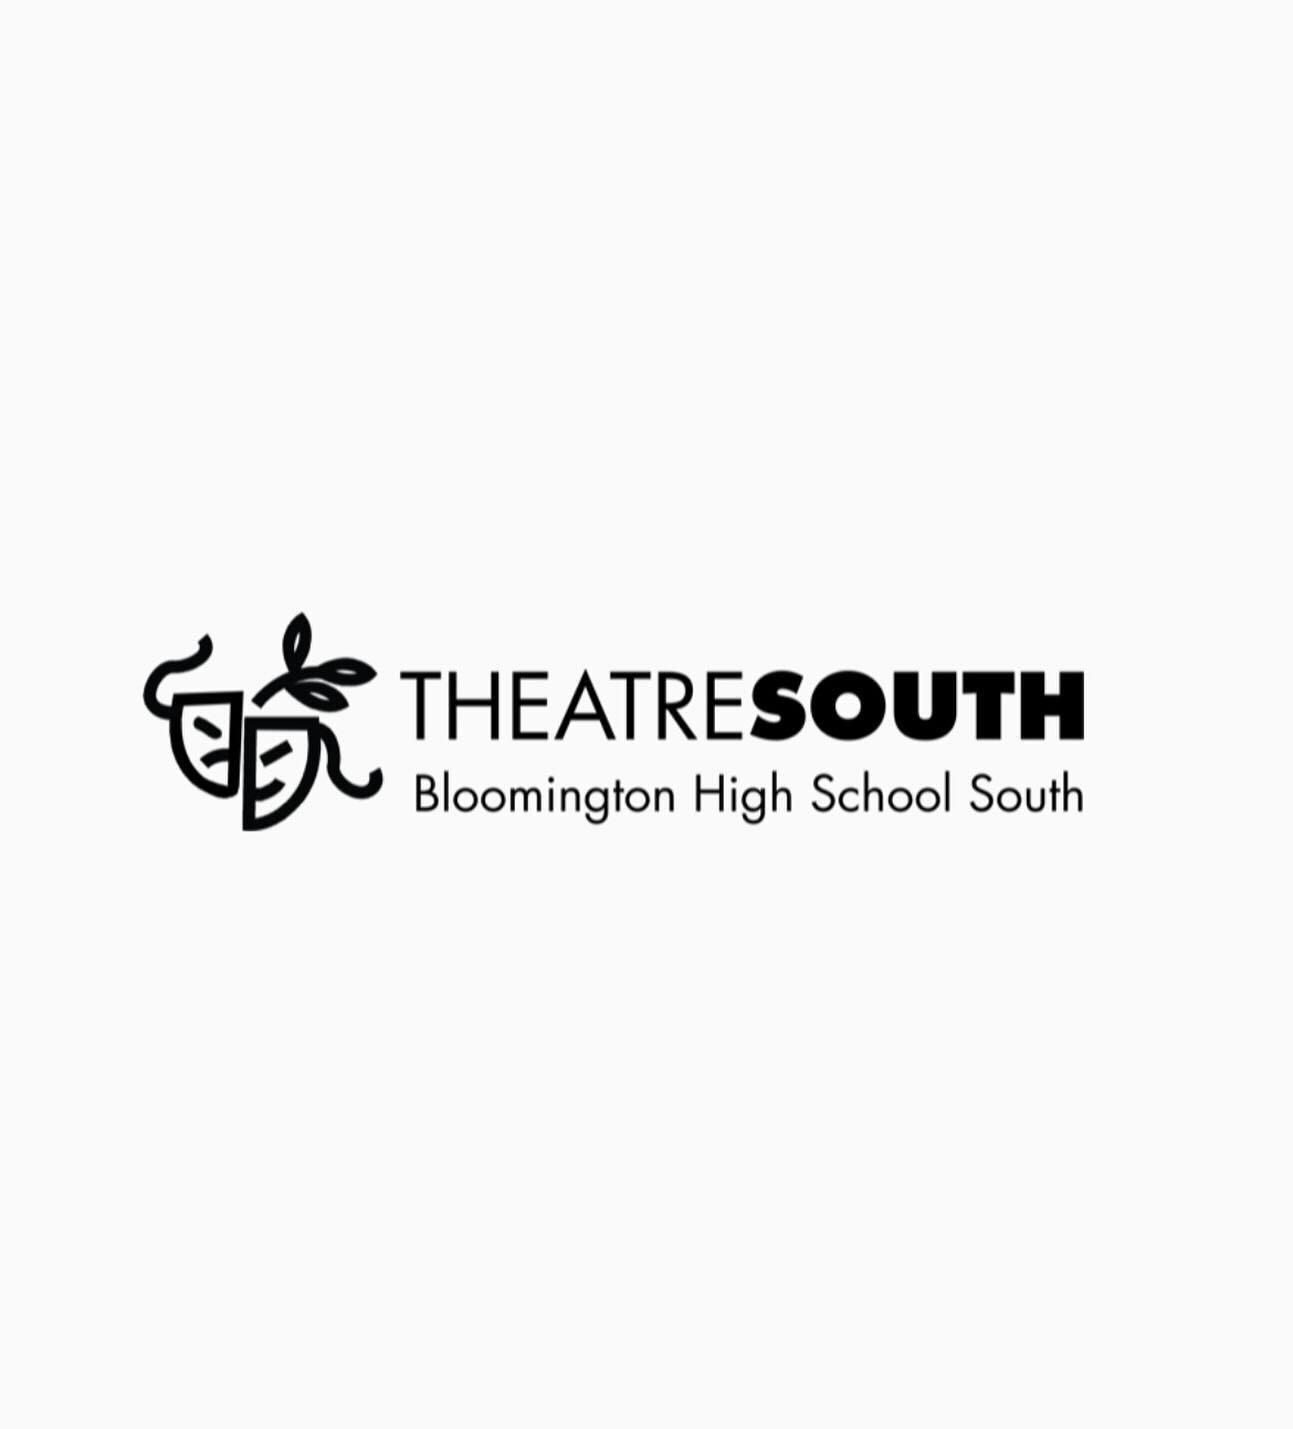 Welcome to the new Theatre South Instagram! We will be keeping you updated on new productions, workshops, projects, actors, and more!